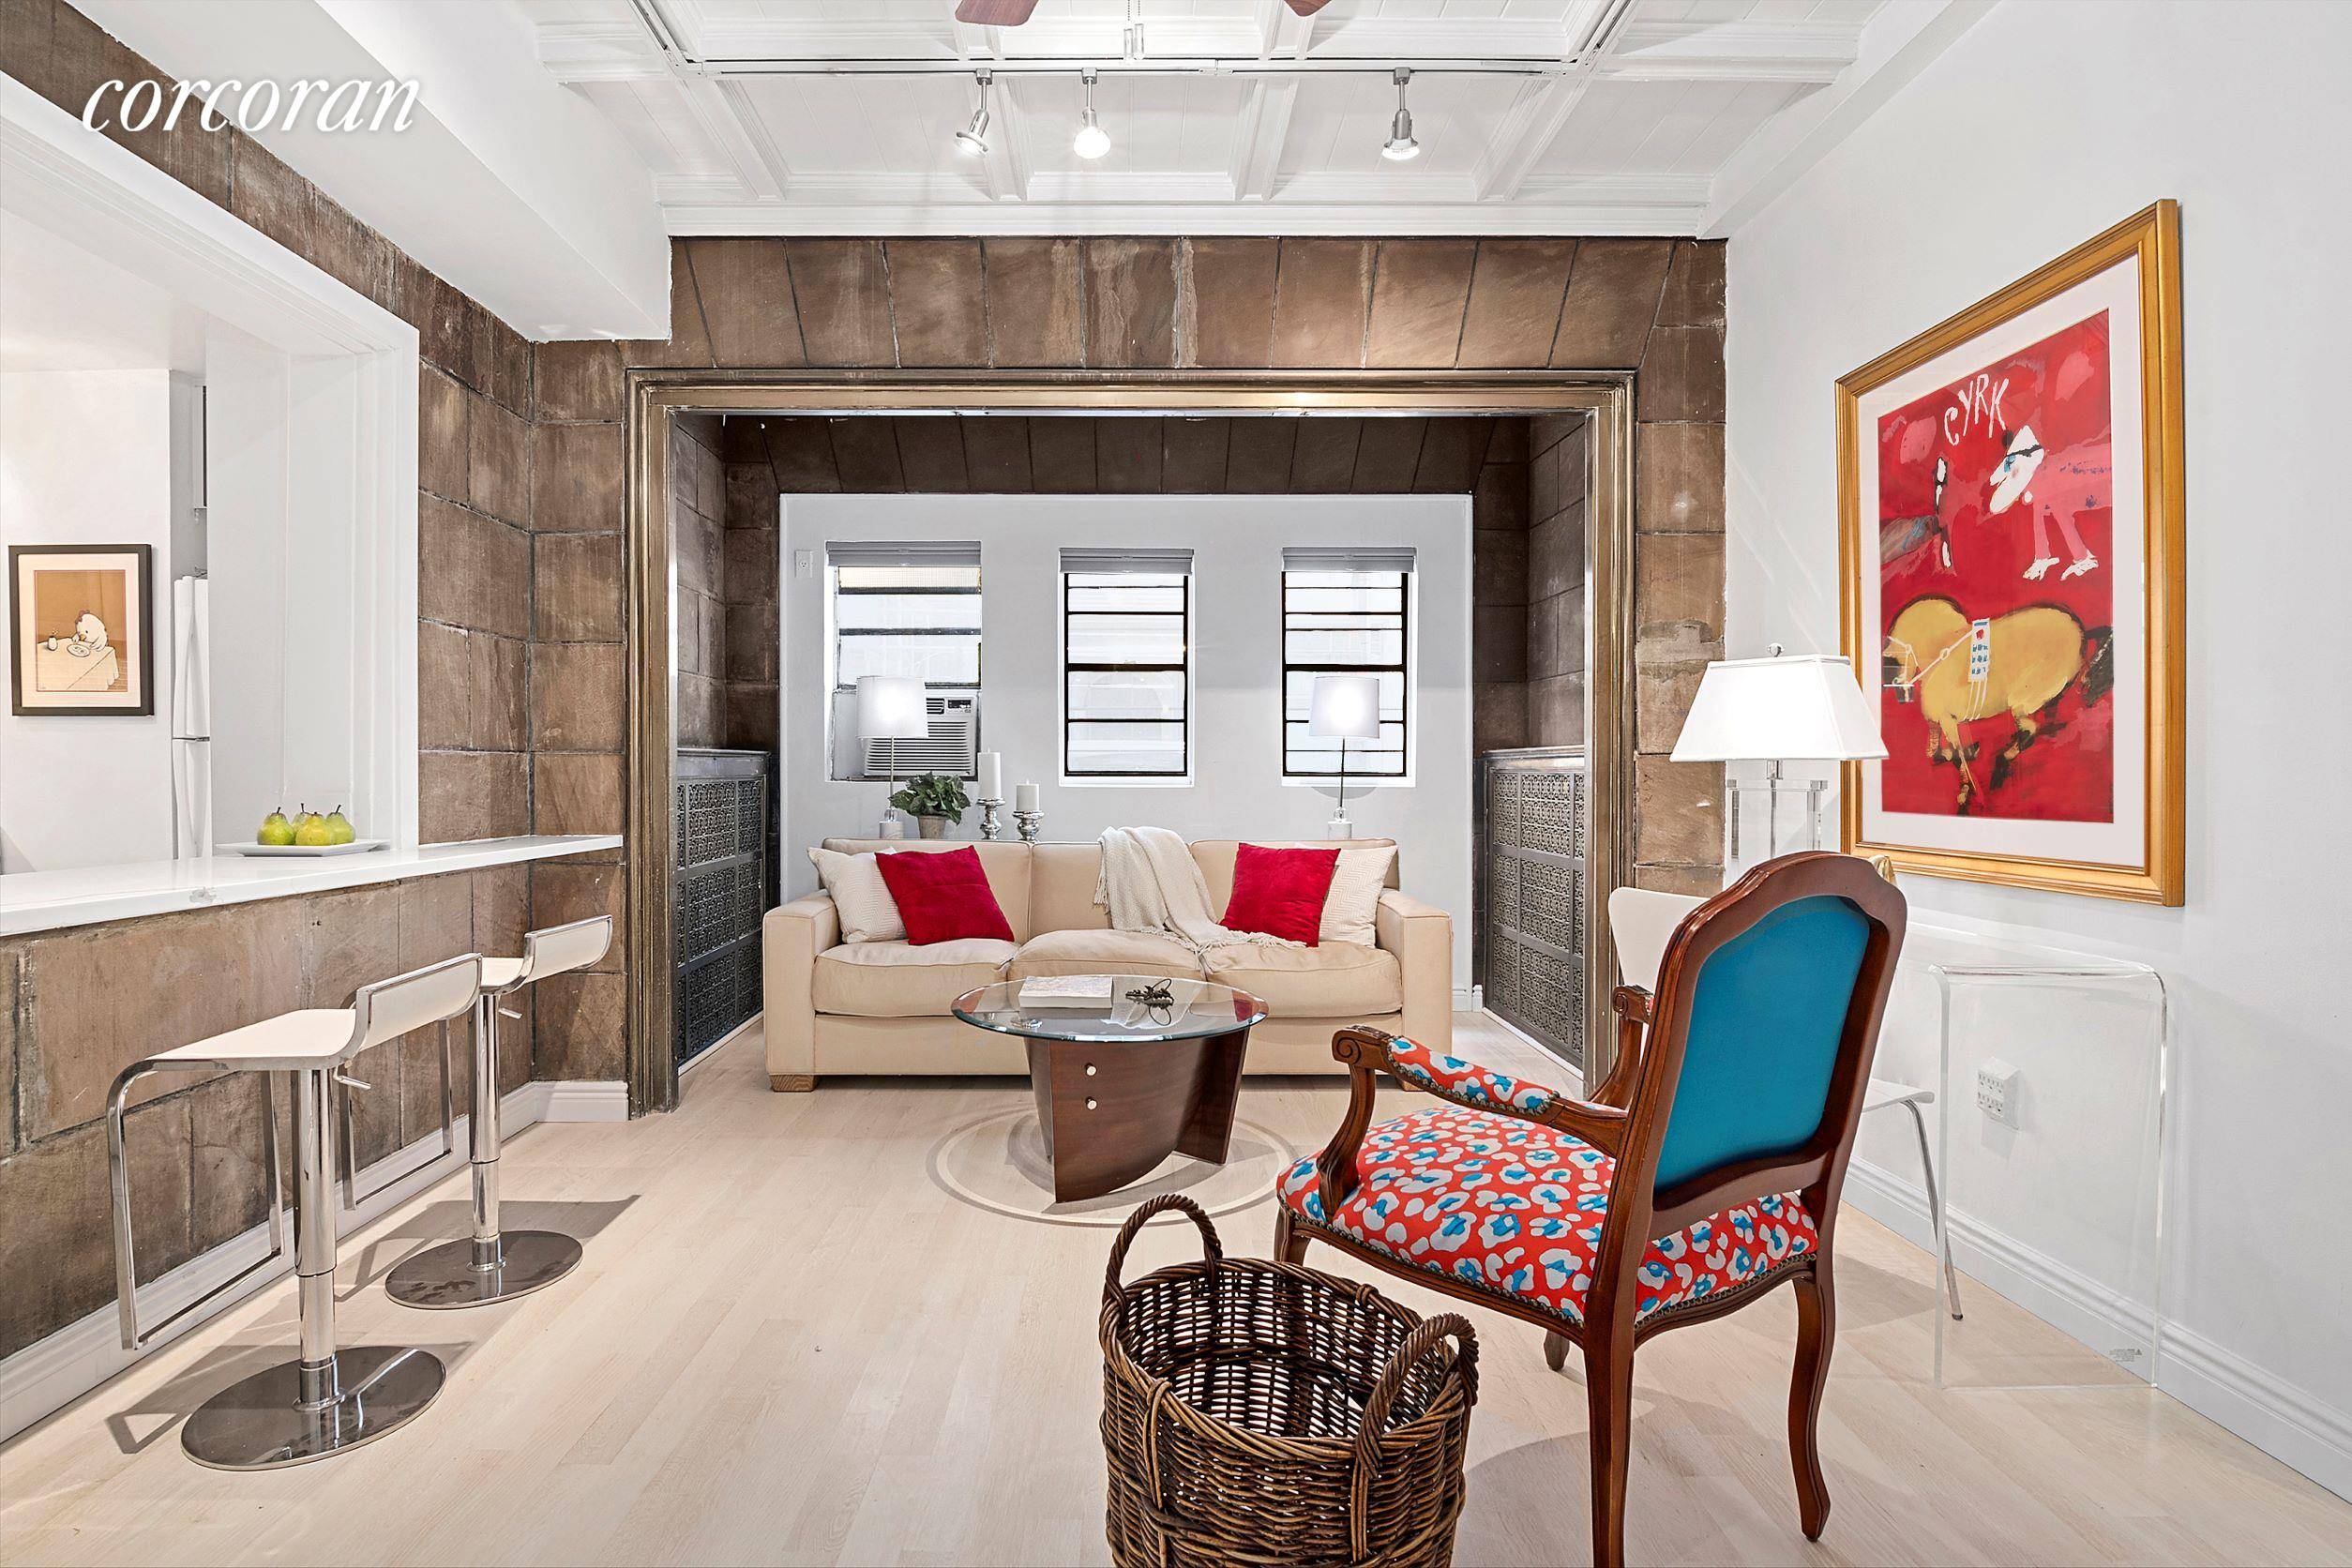 Step into your newly renovated home or professional space in the heart of Gramercy Park.